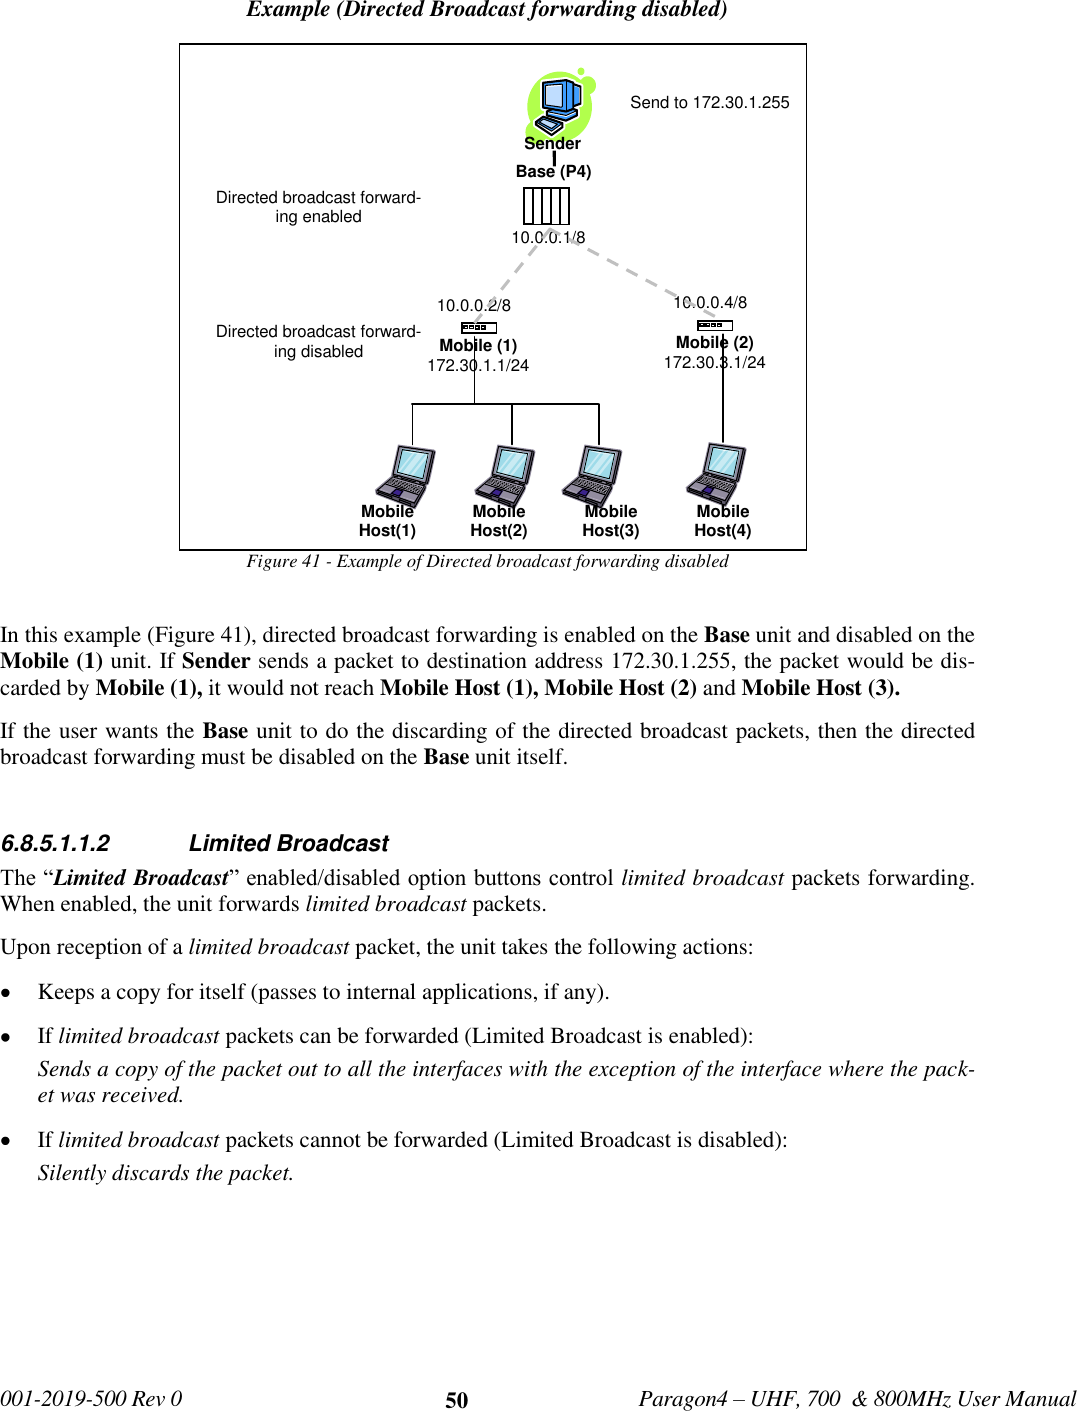   001-2019-500 Rev 0         Paragon4 – UHF, 700  &amp; 800MHz User Manual     50 Example (Directed Broadcast forwarding disabled) Figure 41 - Example of Directed broadcast forwarding disabled  In this example (Figure 41), directed broadcast forwarding is enabled on the Base unit and disabled on the Mobile (1) unit. If Sender sends a packet to destination address 172.30.1.255, the packet would be dis-carded by Mobile (1), it would not reach Mobile Host (1), Mobile Host (2) and Mobile Host (3).  If the user wants the Base unit to do the discarding of the directed broadcast packets, then the directed broadcast forwarding must be disabled on the Base unit itself.   6.8.5.1.1.2  Limited Broadcast  The “Limited Broadcast” enabled/disabled option buttons control limited broadcast packets forwarding. When enabled, the unit forwards limited broadcast packets.  Upon reception of a limited broadcast packet, the unit takes the following actions:  Keeps a copy for itself (passes to internal applications, if any).  If limited broadcast packets can be forwarded (Limited Broadcast is enabled):  Sends a copy of the packet out to all the interfaces with the exception of the interface where the pack-et was received.  If limited broadcast packets cannot be forwarded (Limited Broadcast is disabled): Silently discards the packet.     Sender  Base (P4) Mobile (1) 172.30.1.1/24 Mobile (2) 172.30.3.1/24 10.0.0.1/8 10.0.0.2/8 10.0.0.4/8 Directed broadcast forward-ing enabled Directed broadcast forward-ing disabled Send to 172.30.1.255 Mobile Host(2) 172.30.1.3/24 Mobile Host(3) 172.30.1.4/24 Mobile Host(1) 172.30.1.2/24 Mobile Host(4) 172.30.3.2/24 